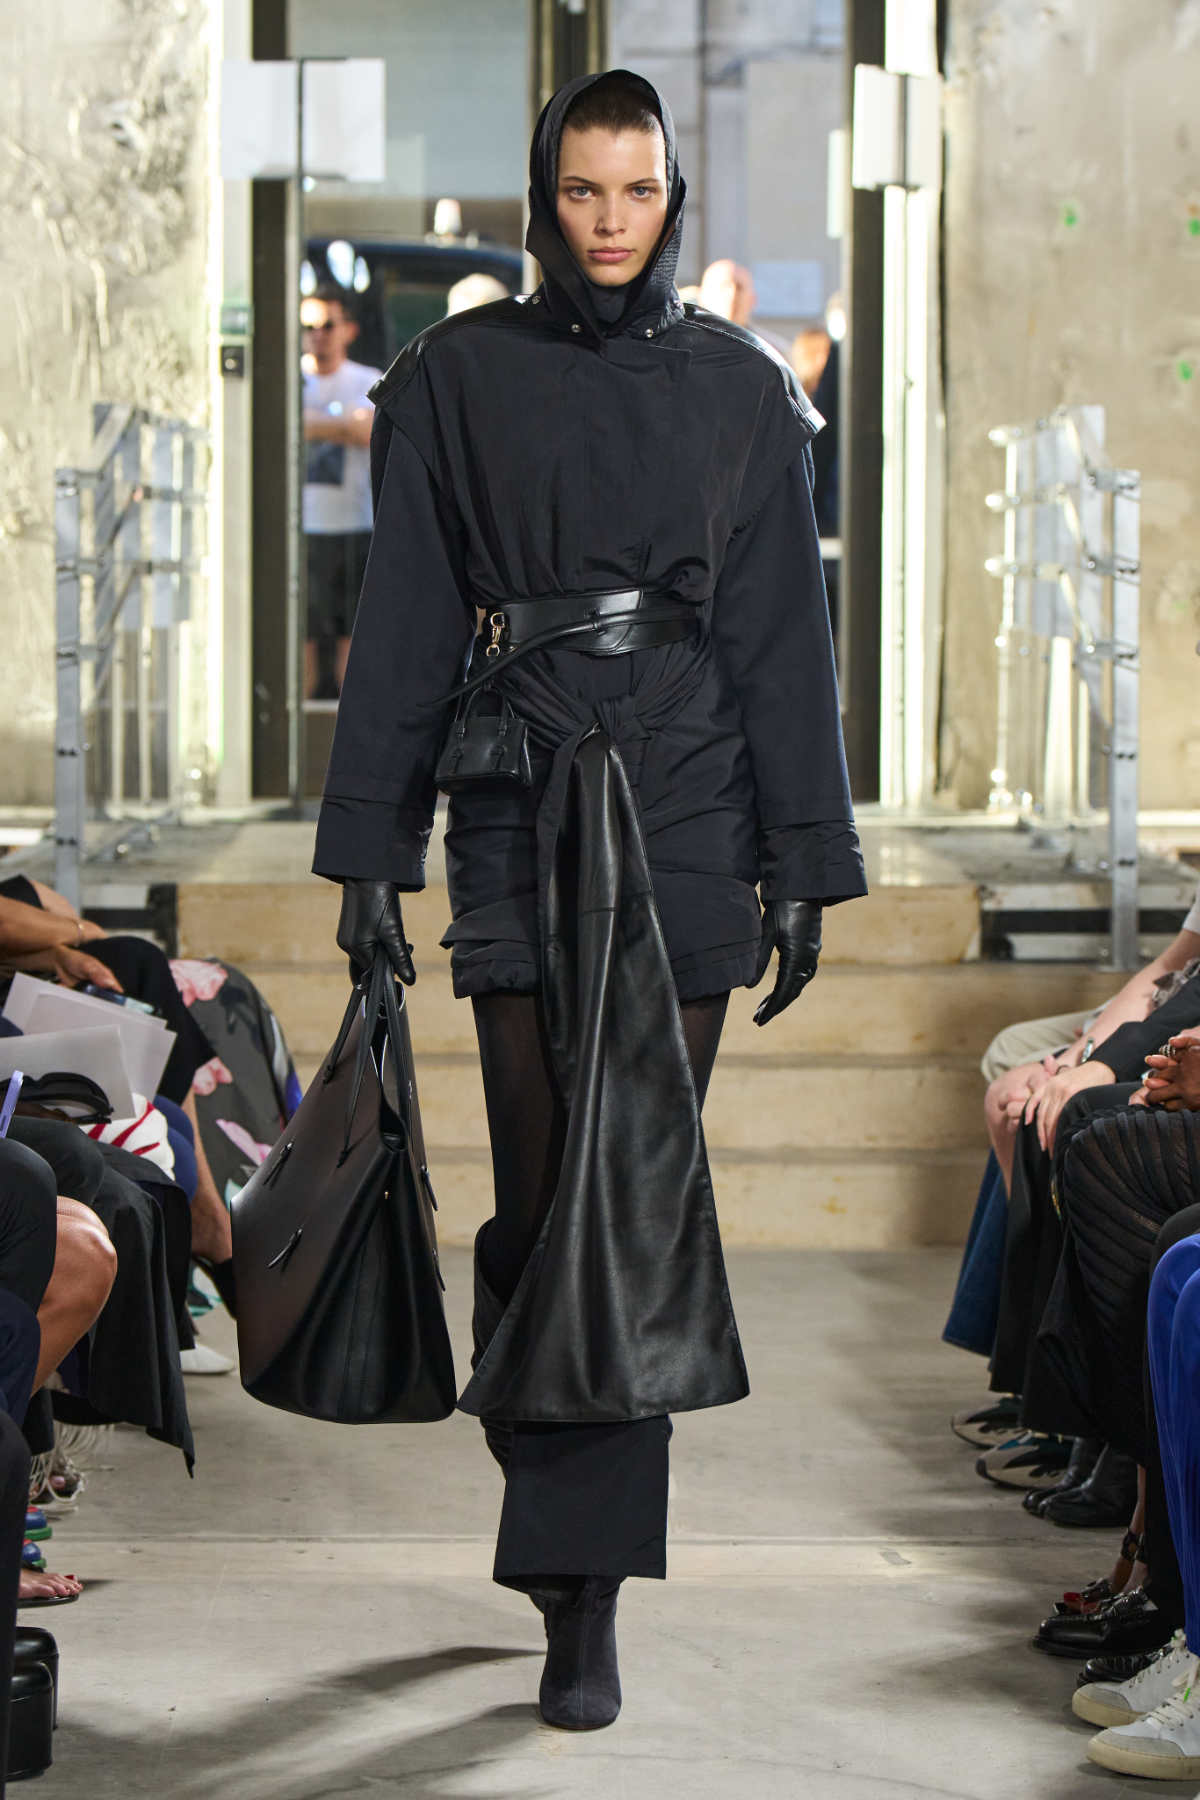 Alaïa Presents Its New Winter Spring 2023 Collection